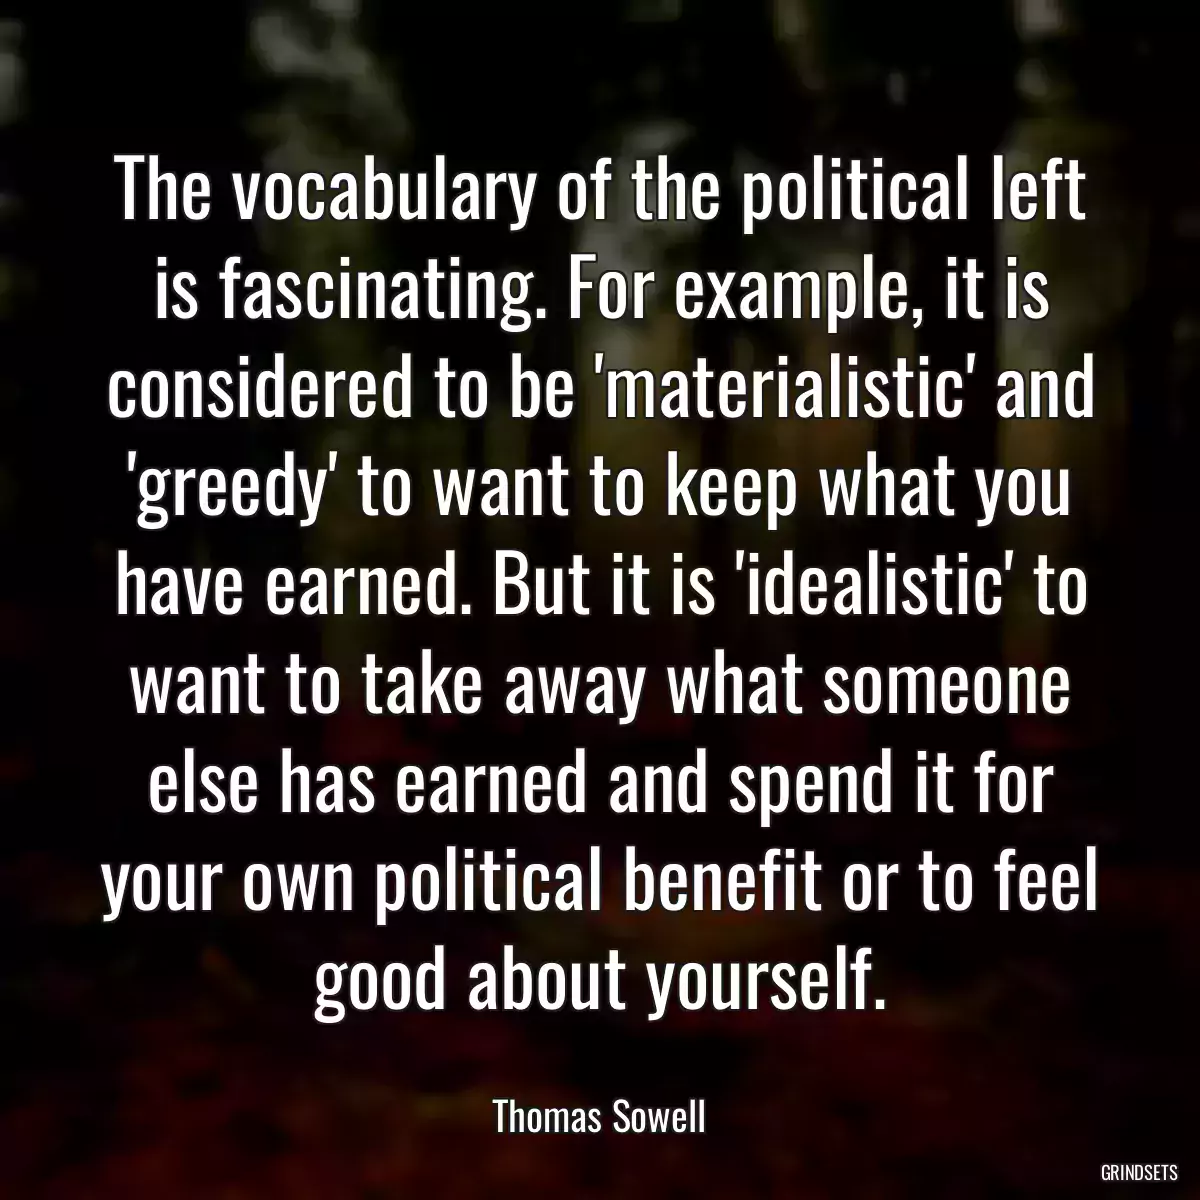 The vocabulary of the political left is fascinating. For example, it is considered to be \'materialistic\' and \'greedy\' to want to keep what you have earned. But it is \'idealistic\' to want to take away what someone else has earned and spend it for your own political benefit or to feel good about yourself.